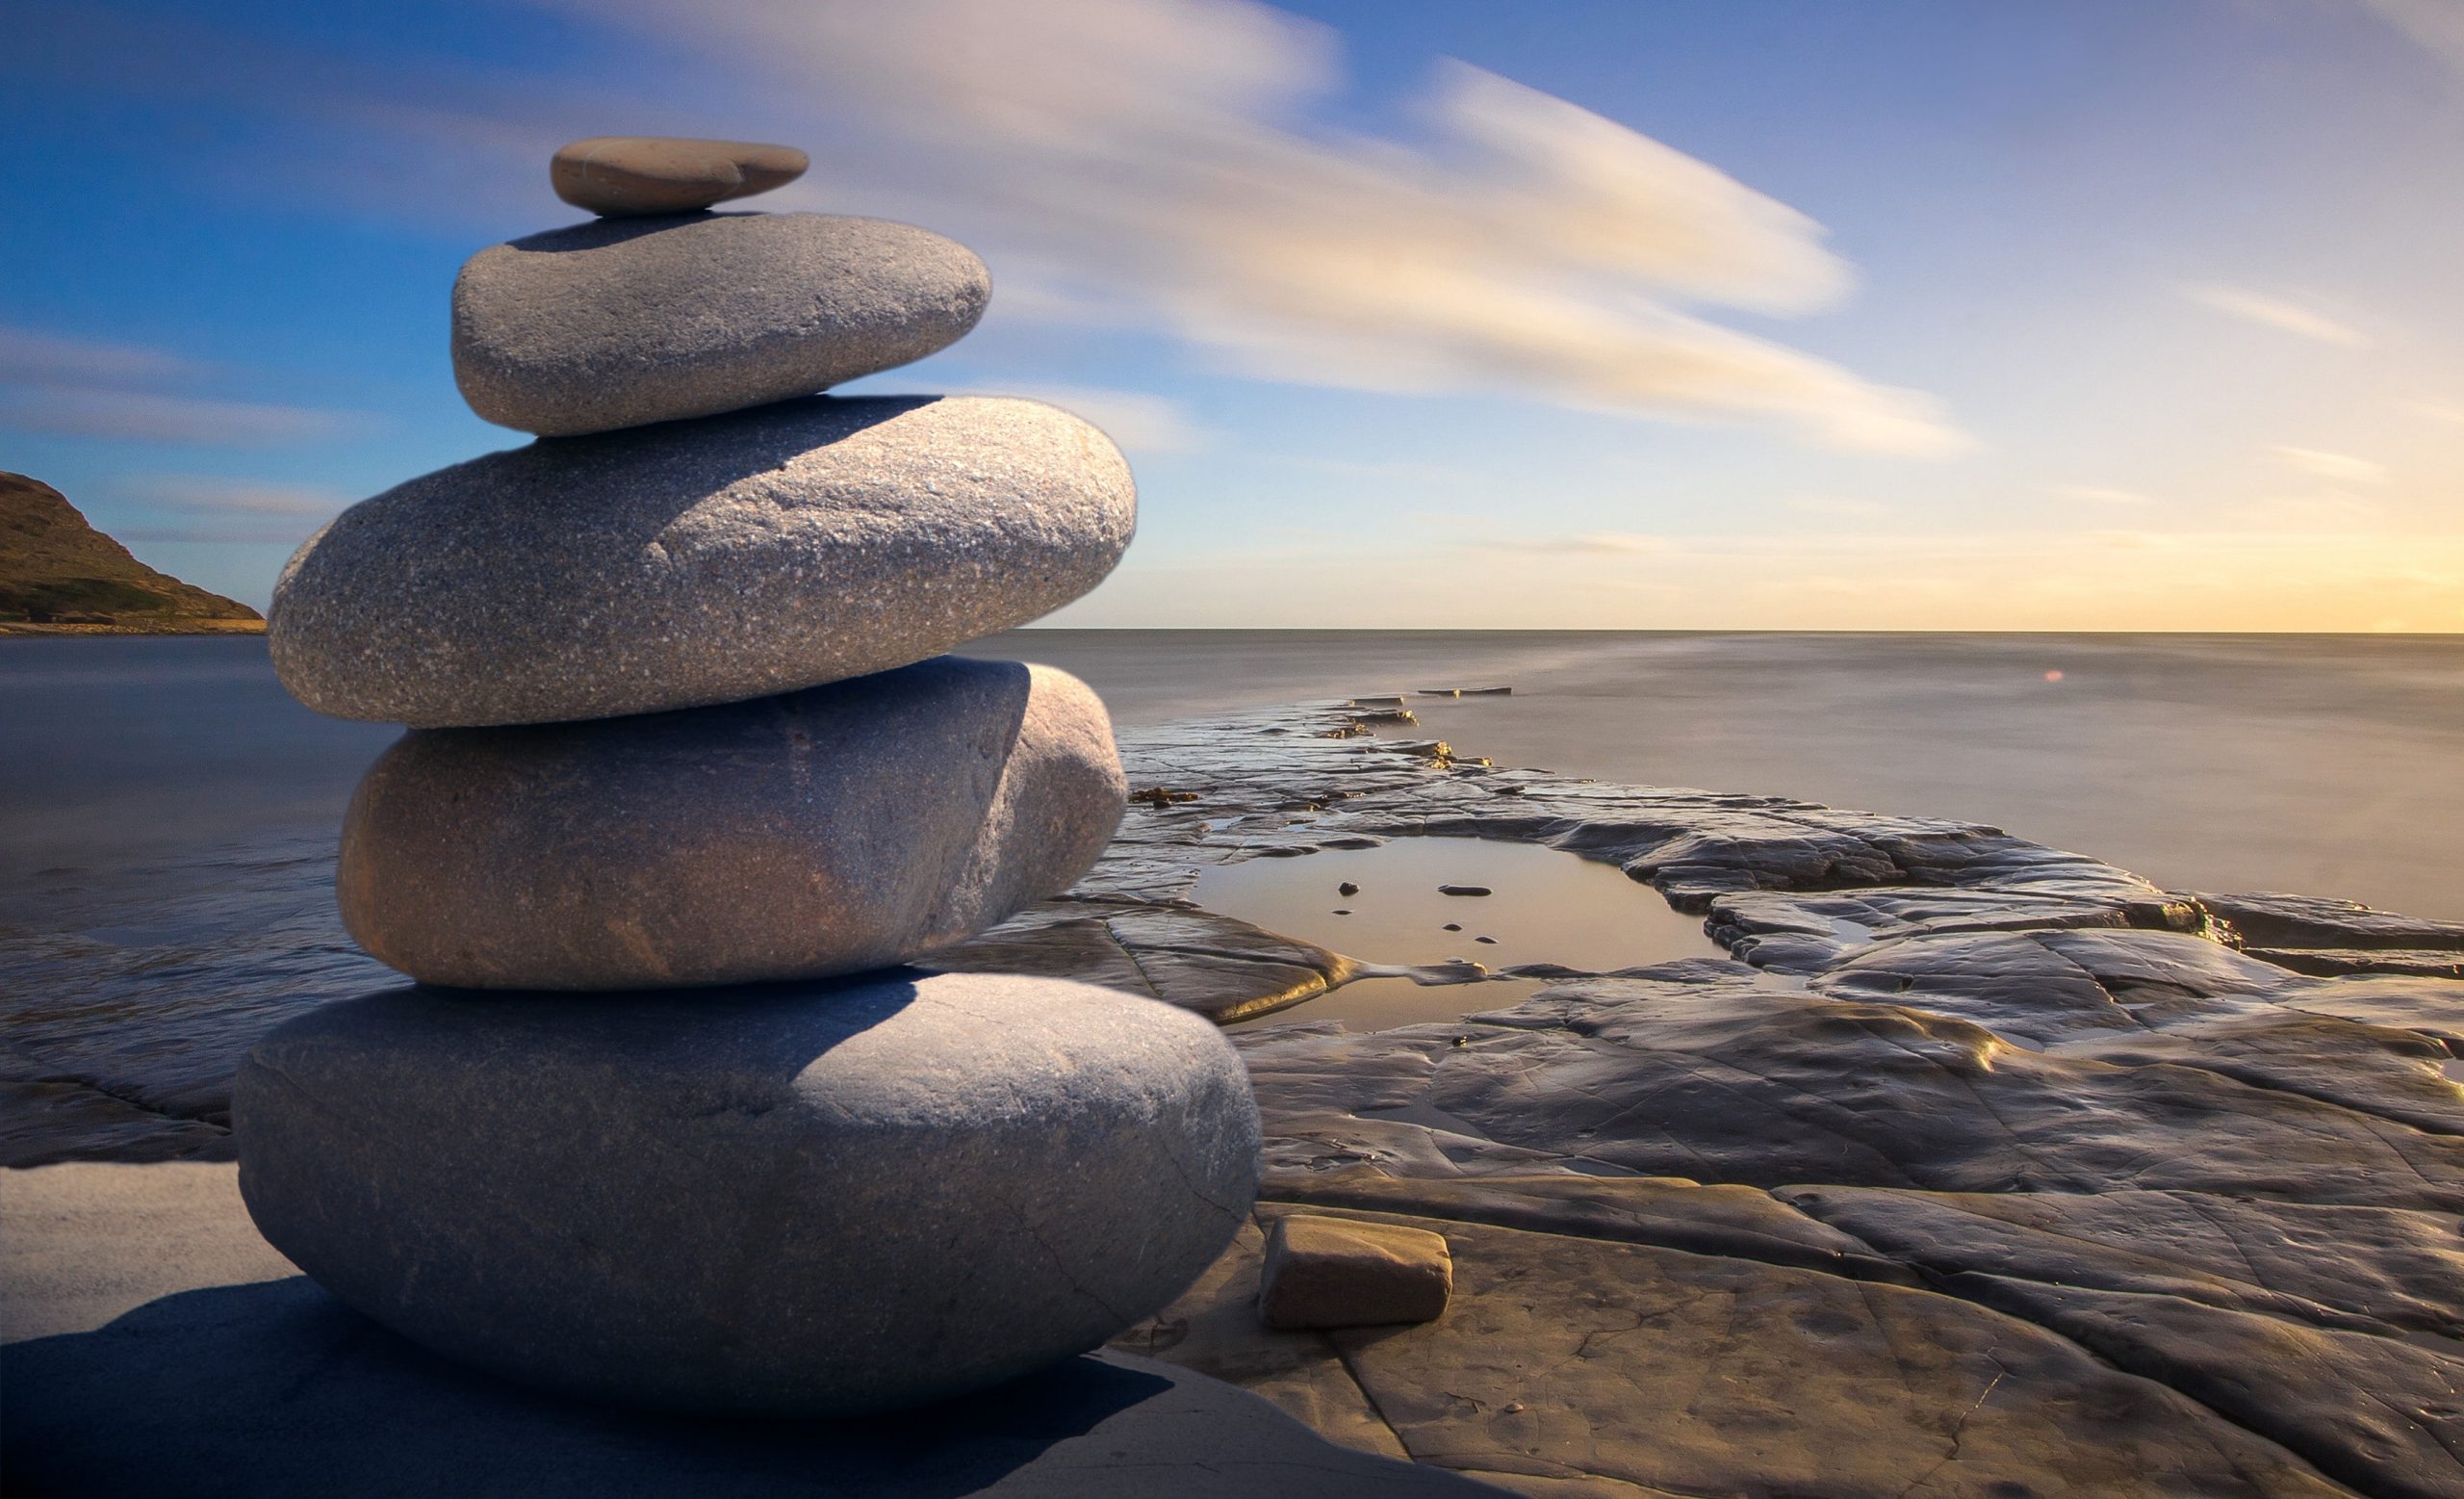 Stock image of rocks stacked on a beach, representing the risks nearby for all constructions